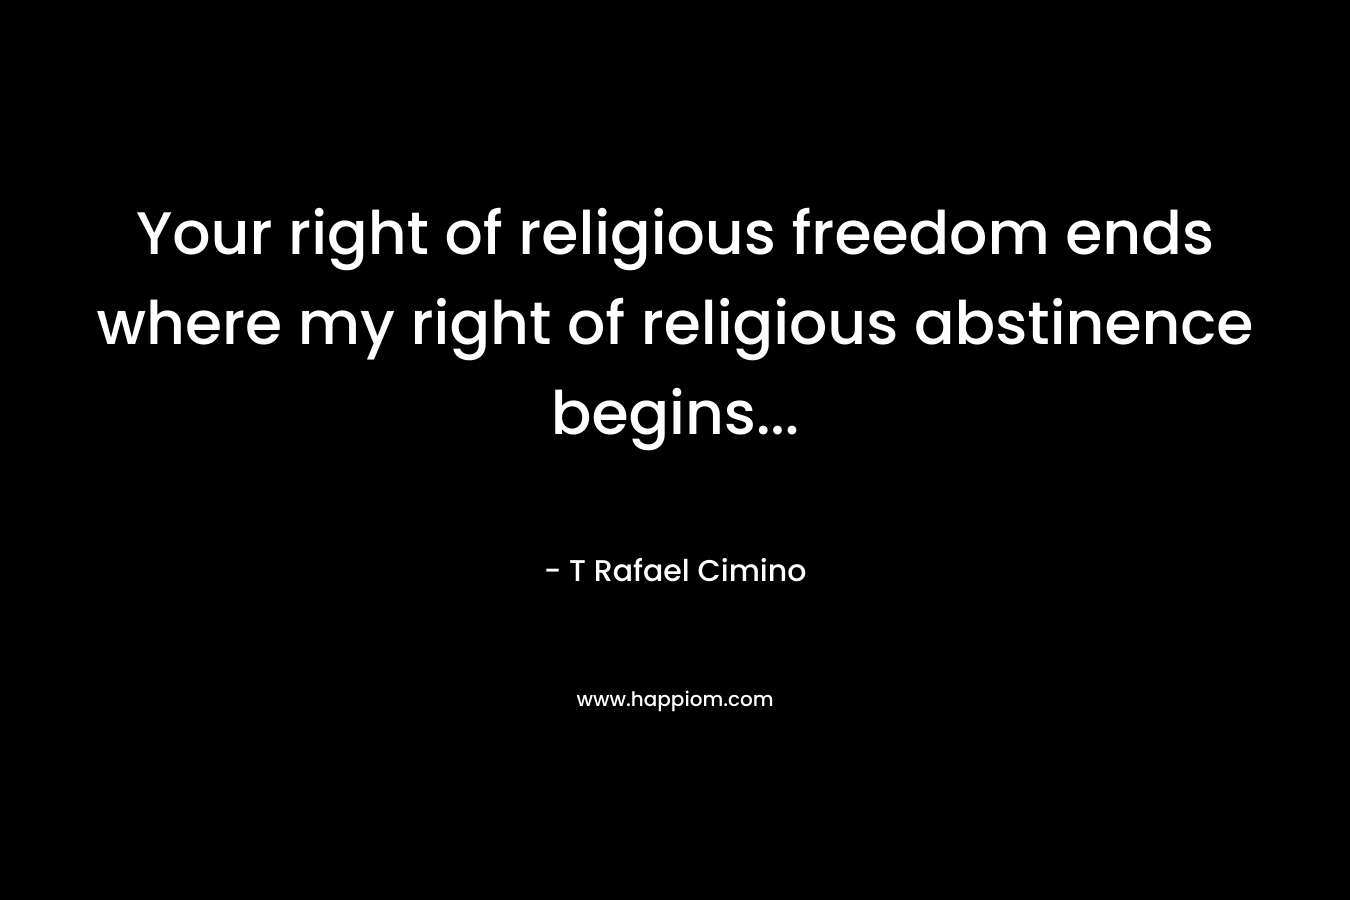 Your right of religious freedom ends where my right of religious abstinence begins...